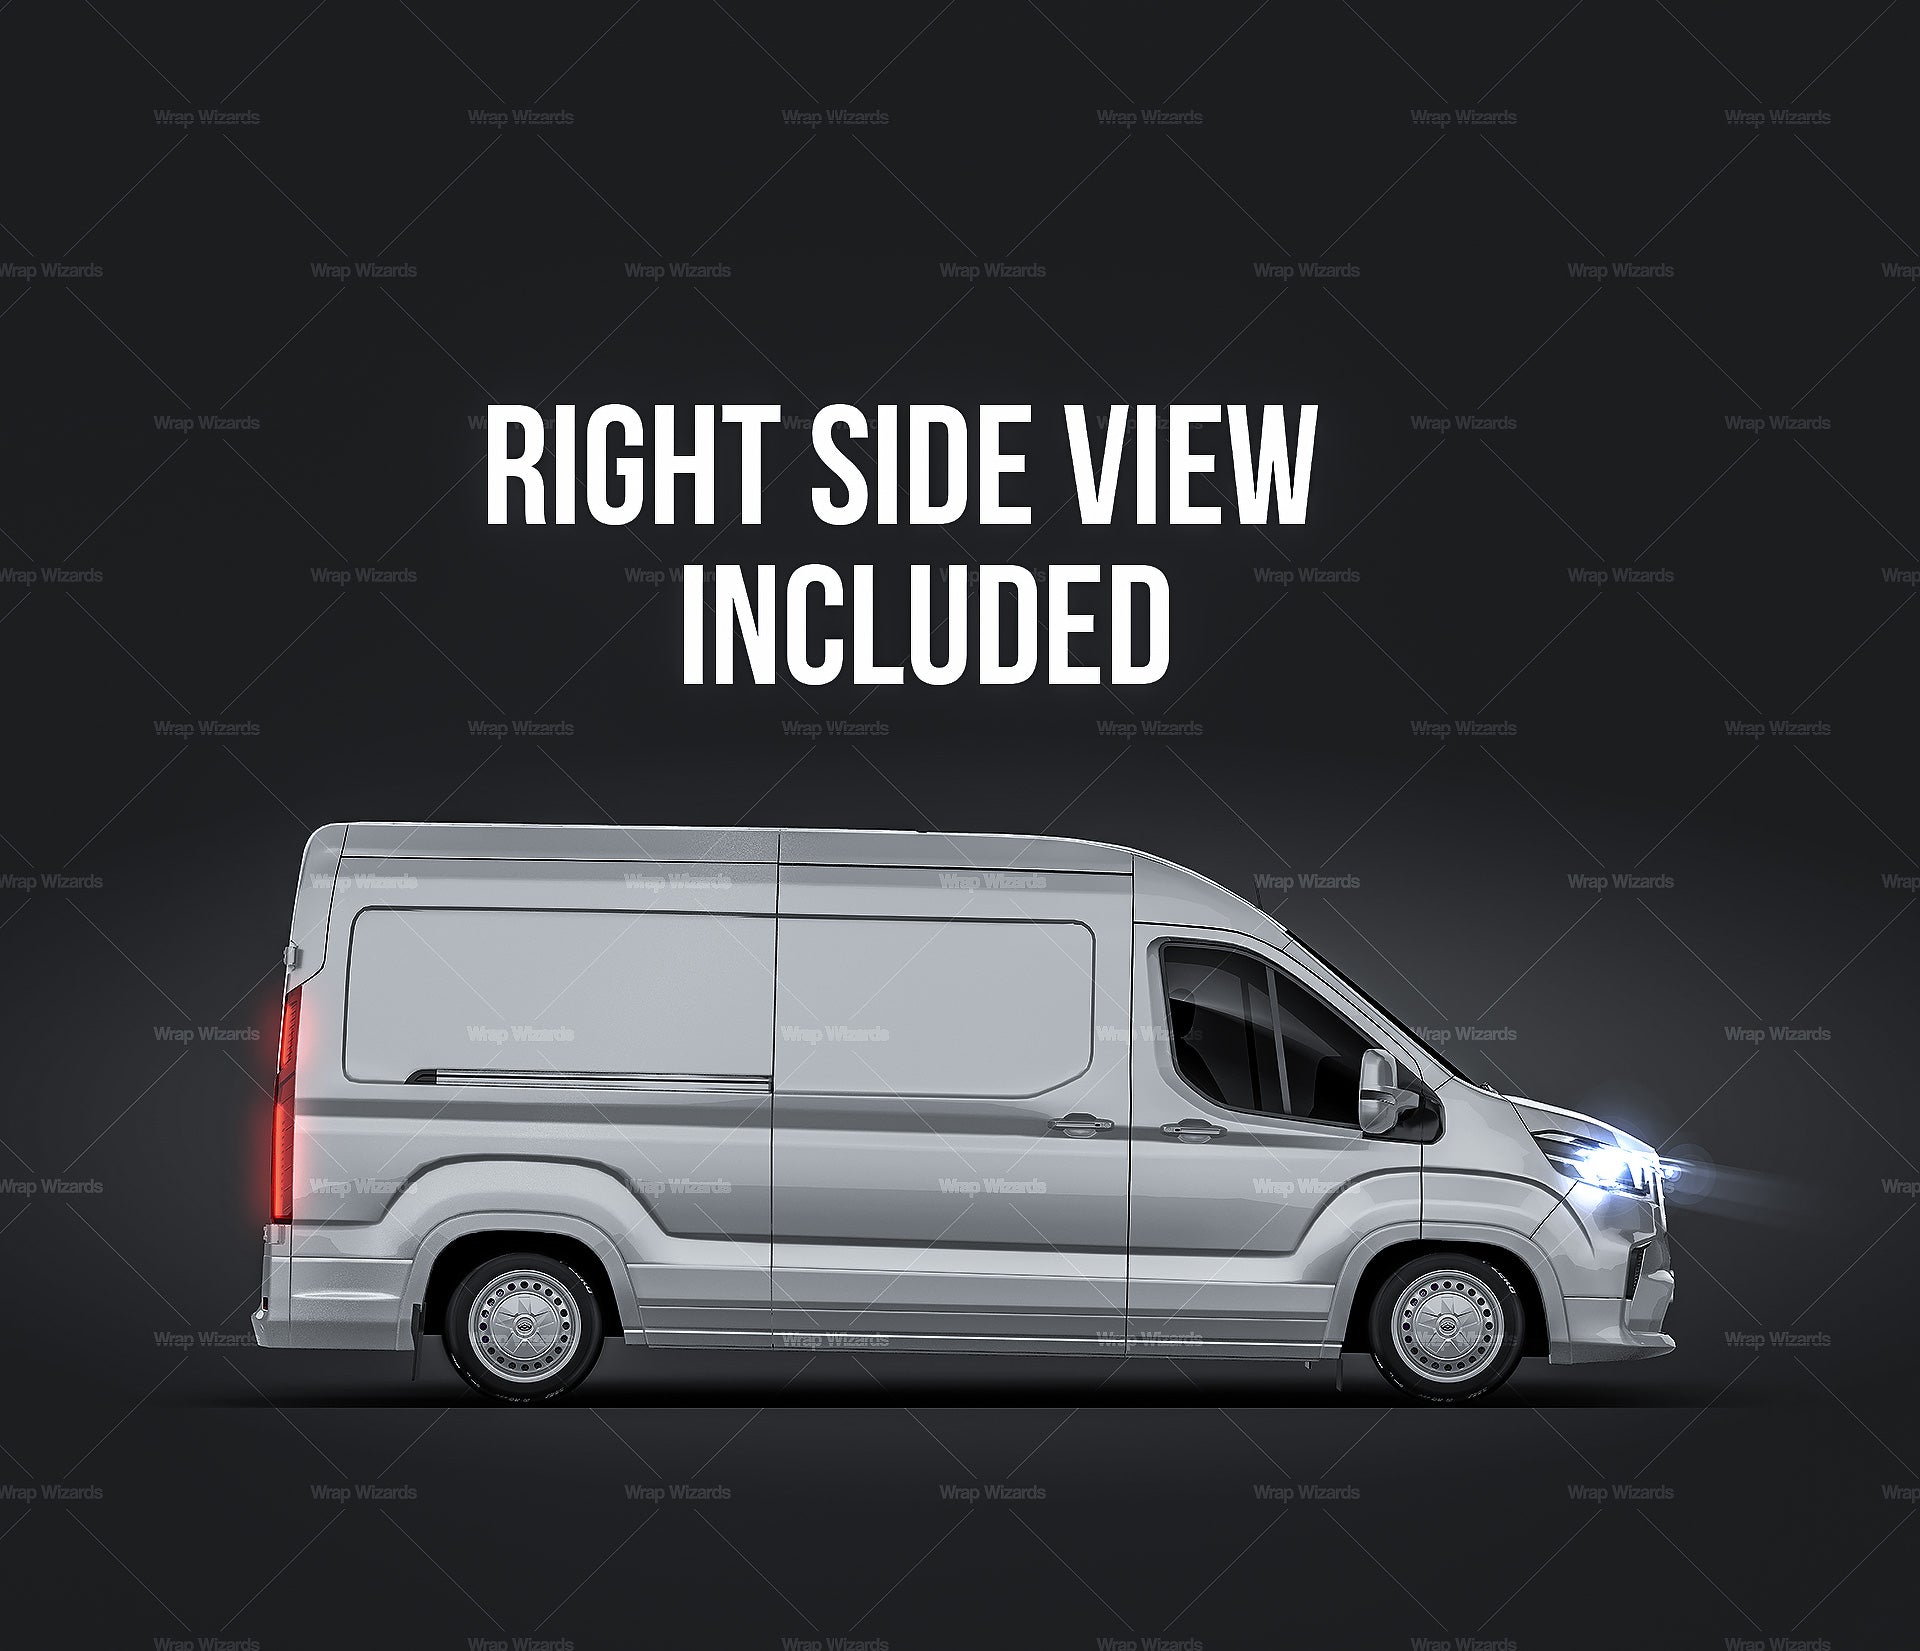 Maxus Deliver 9 | LDV Deliver 9 L3H2 glossy finish - all sides Car Mockup Template.psd